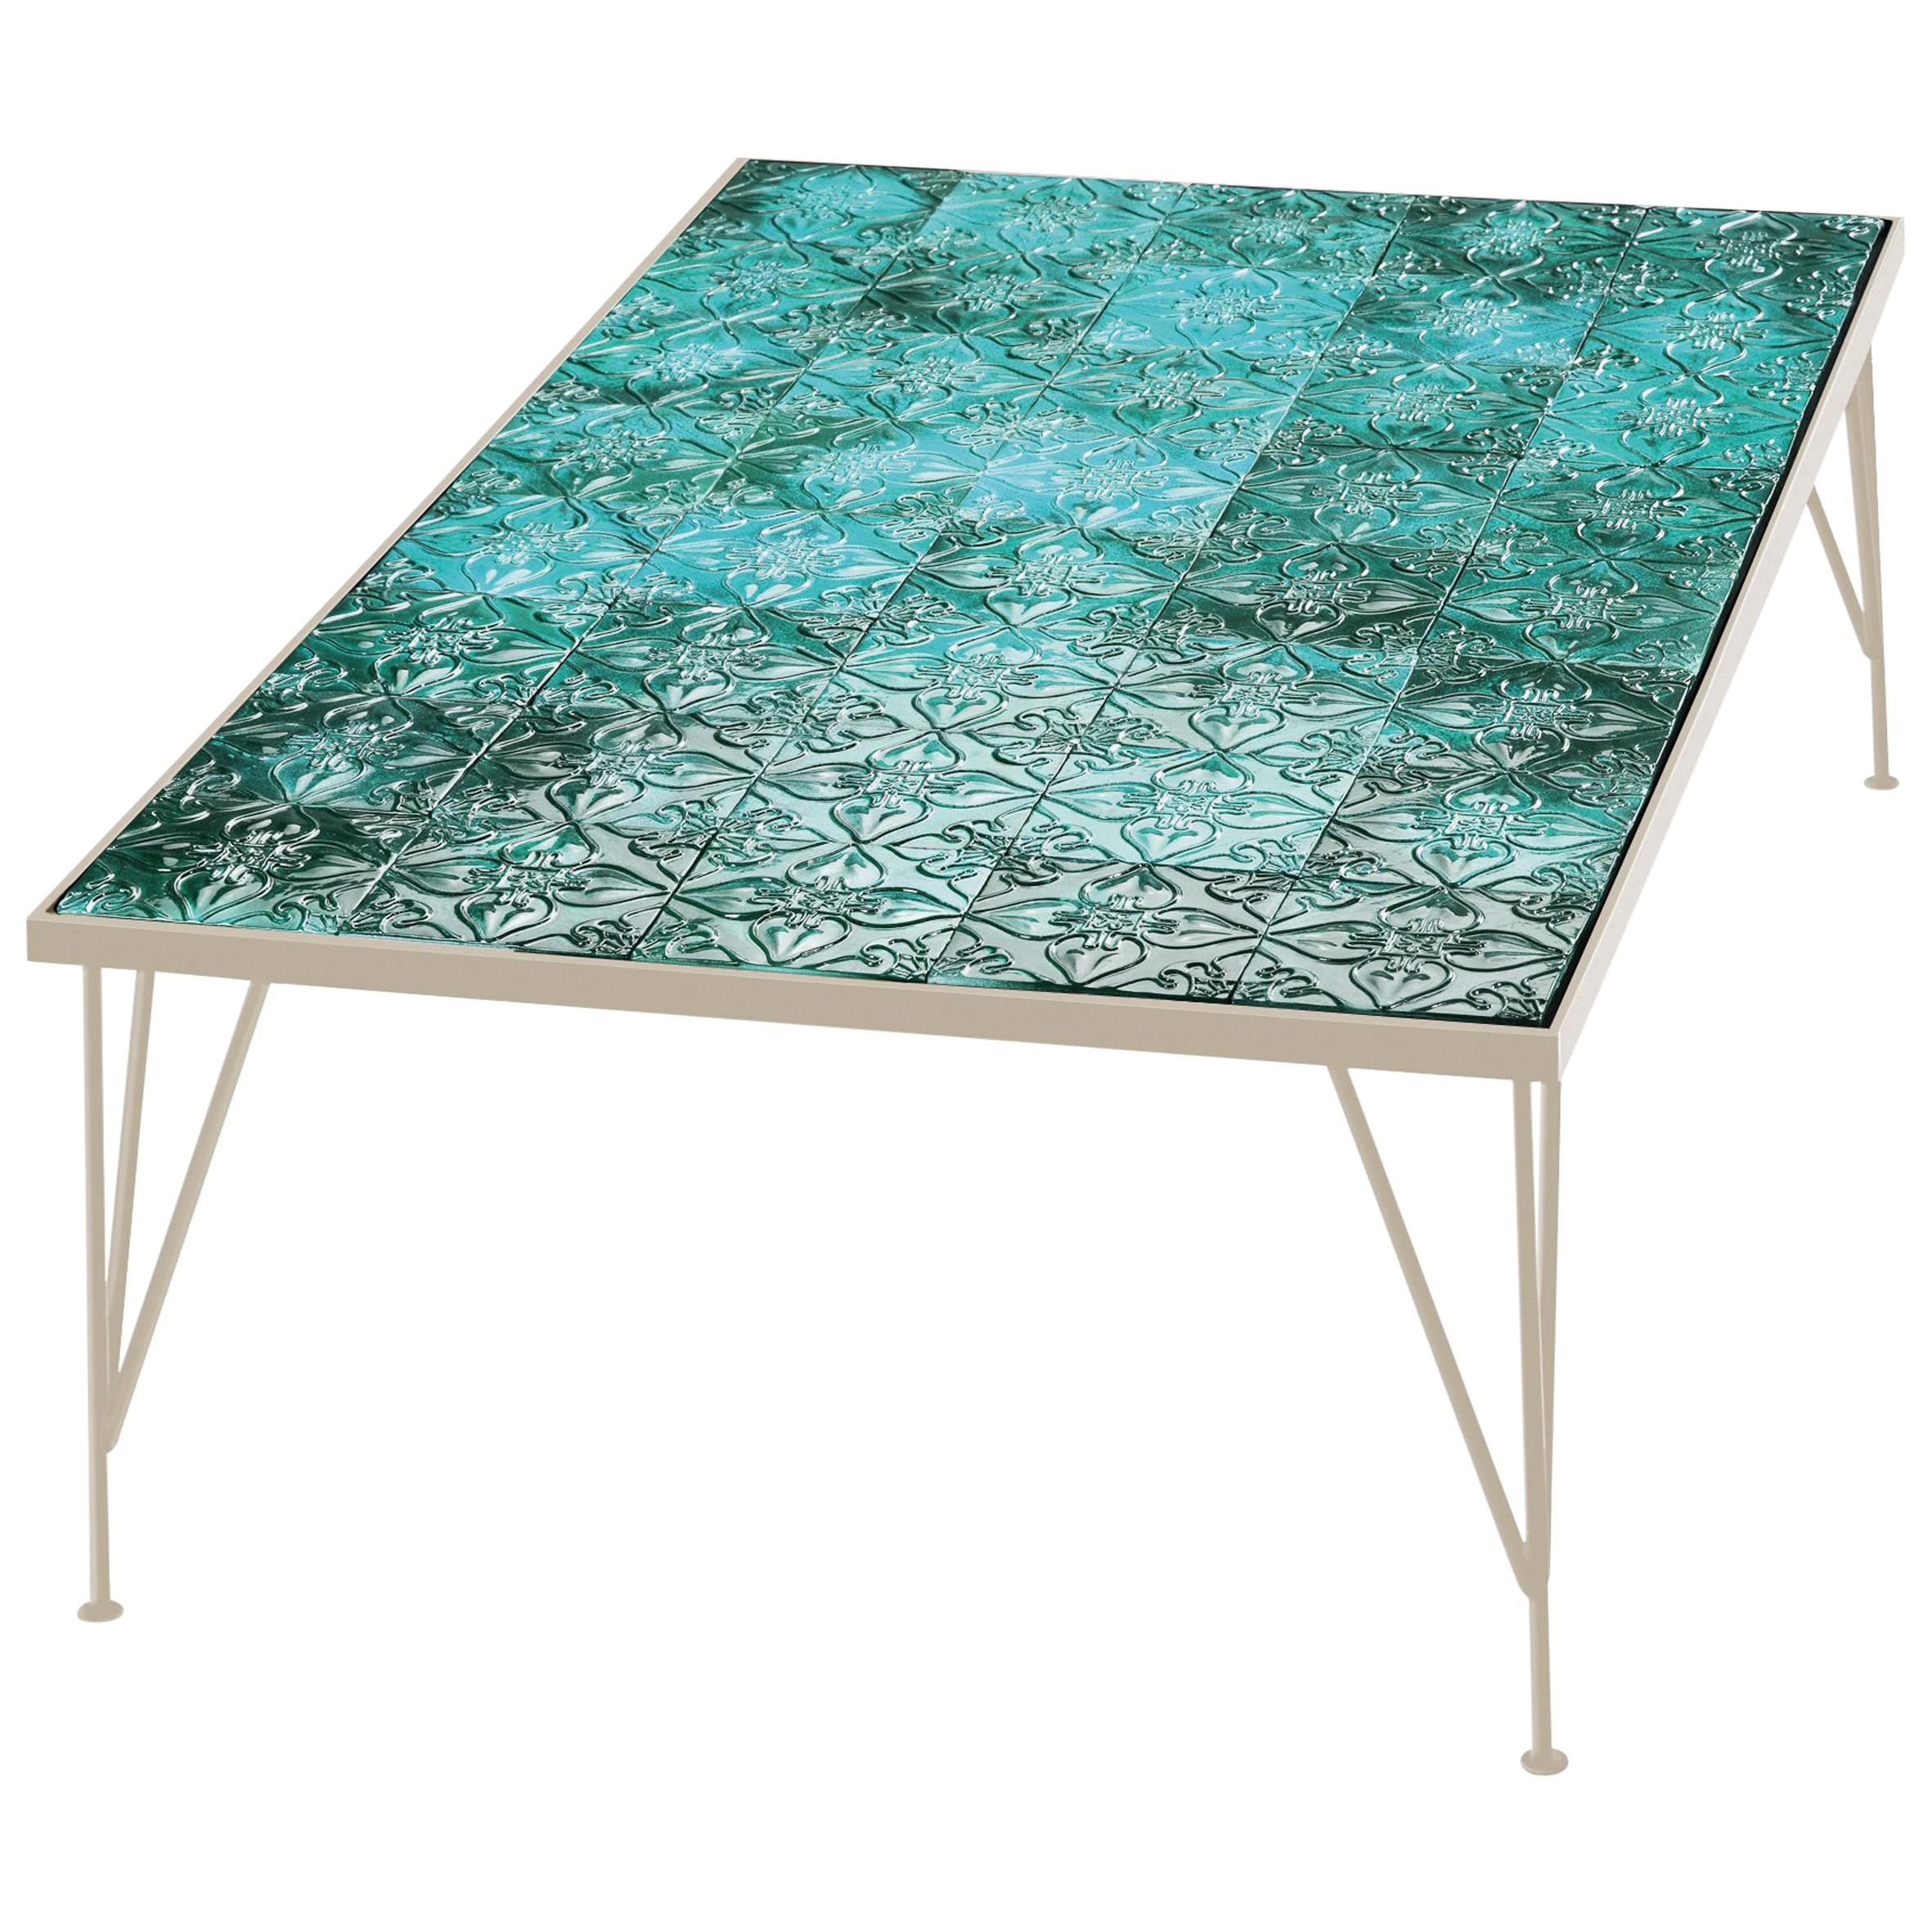 Centre Table Caldas for Outdoors For Sale